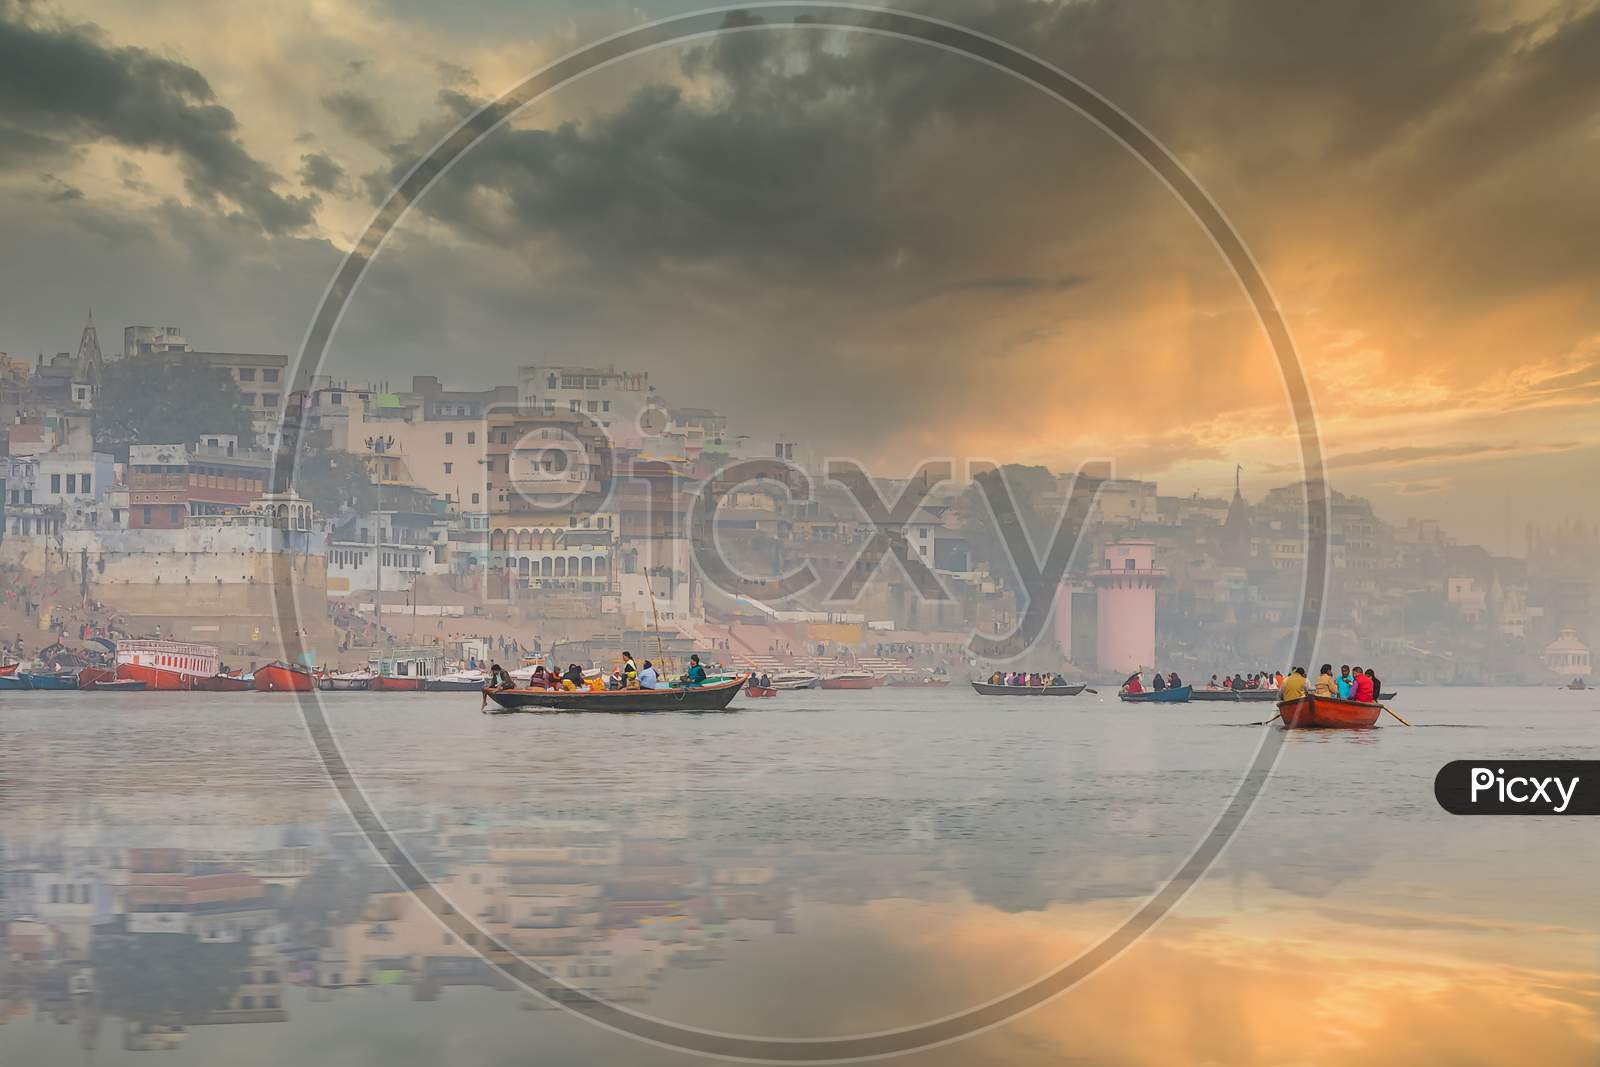 The refections of the historic homesteads of Varanasi India as seen from a boat on the river Ganges.